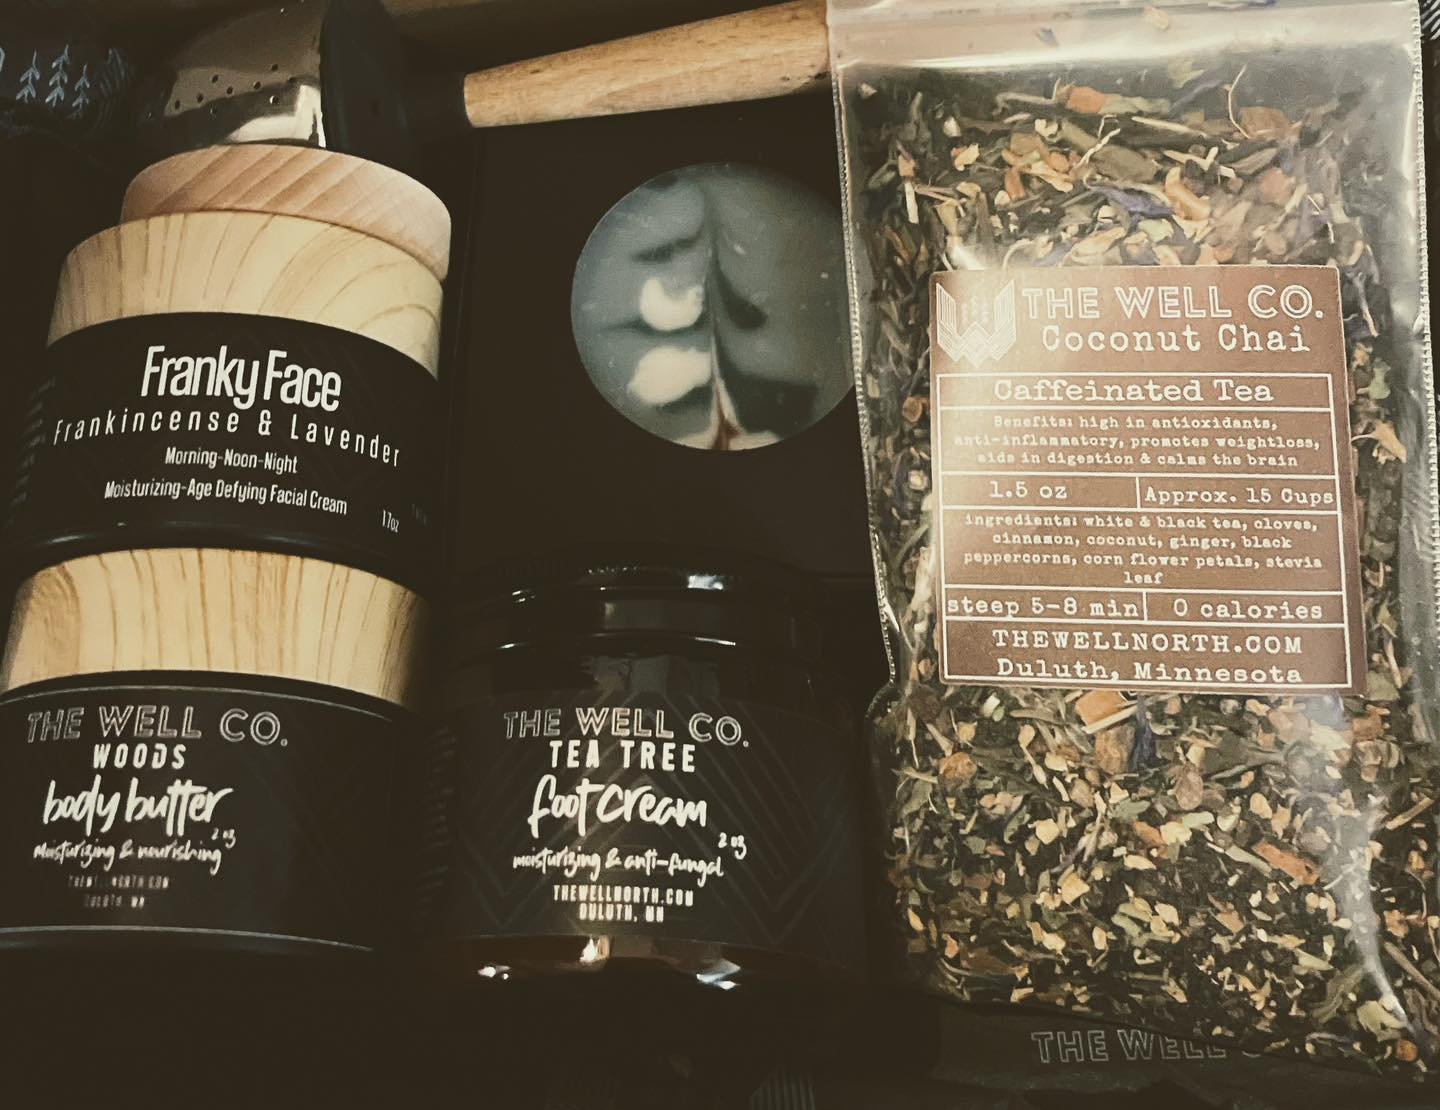 Mother&rsquo;s Day Gift Box available for pick up! 218-727-8035 

Mother&rsquo;s Day is 3 Days Away ❤️

This is a gift box of best selling products!
Franky Face Cream-Woods Body Butter-Tea Tree Foot Cream-Woods Body Soap-Coconut Chai Tea-Tea Infuser!